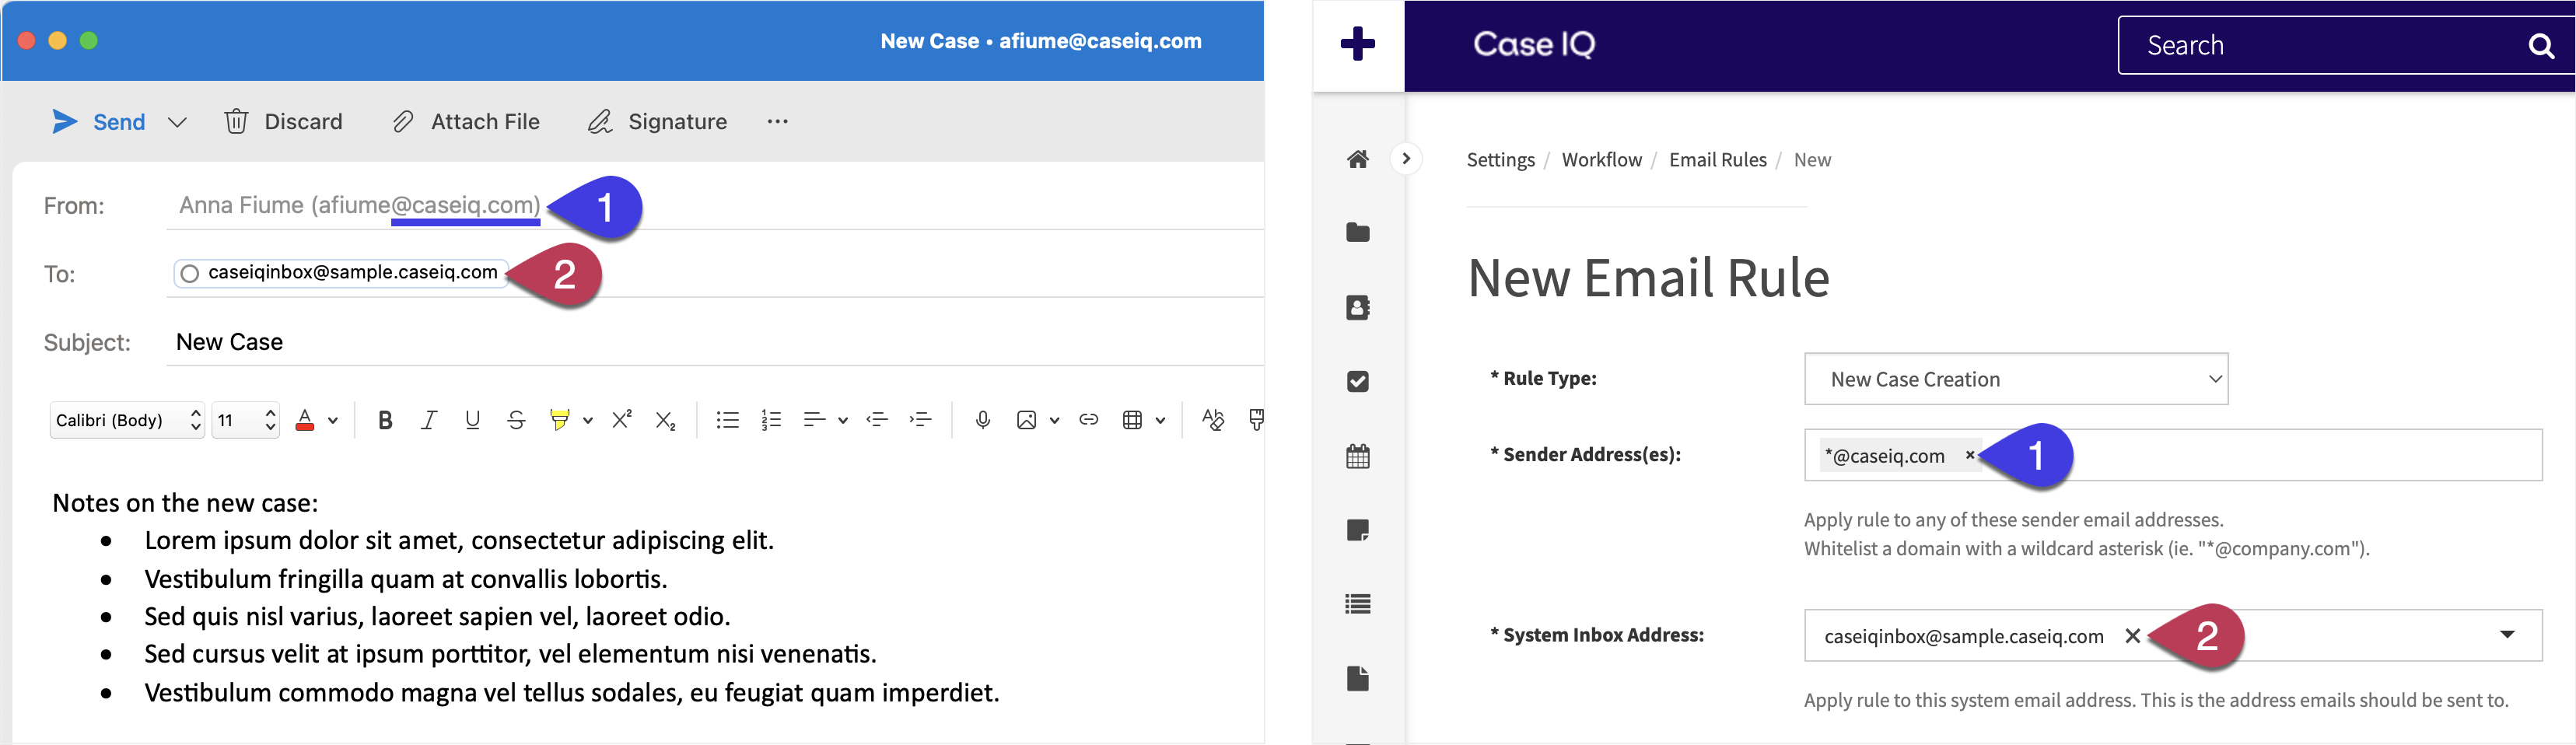 Side by side comparison of an email sent to the System Inbox email address and the example New Email Rule form for the New Case Creation rule created in the previous section. 